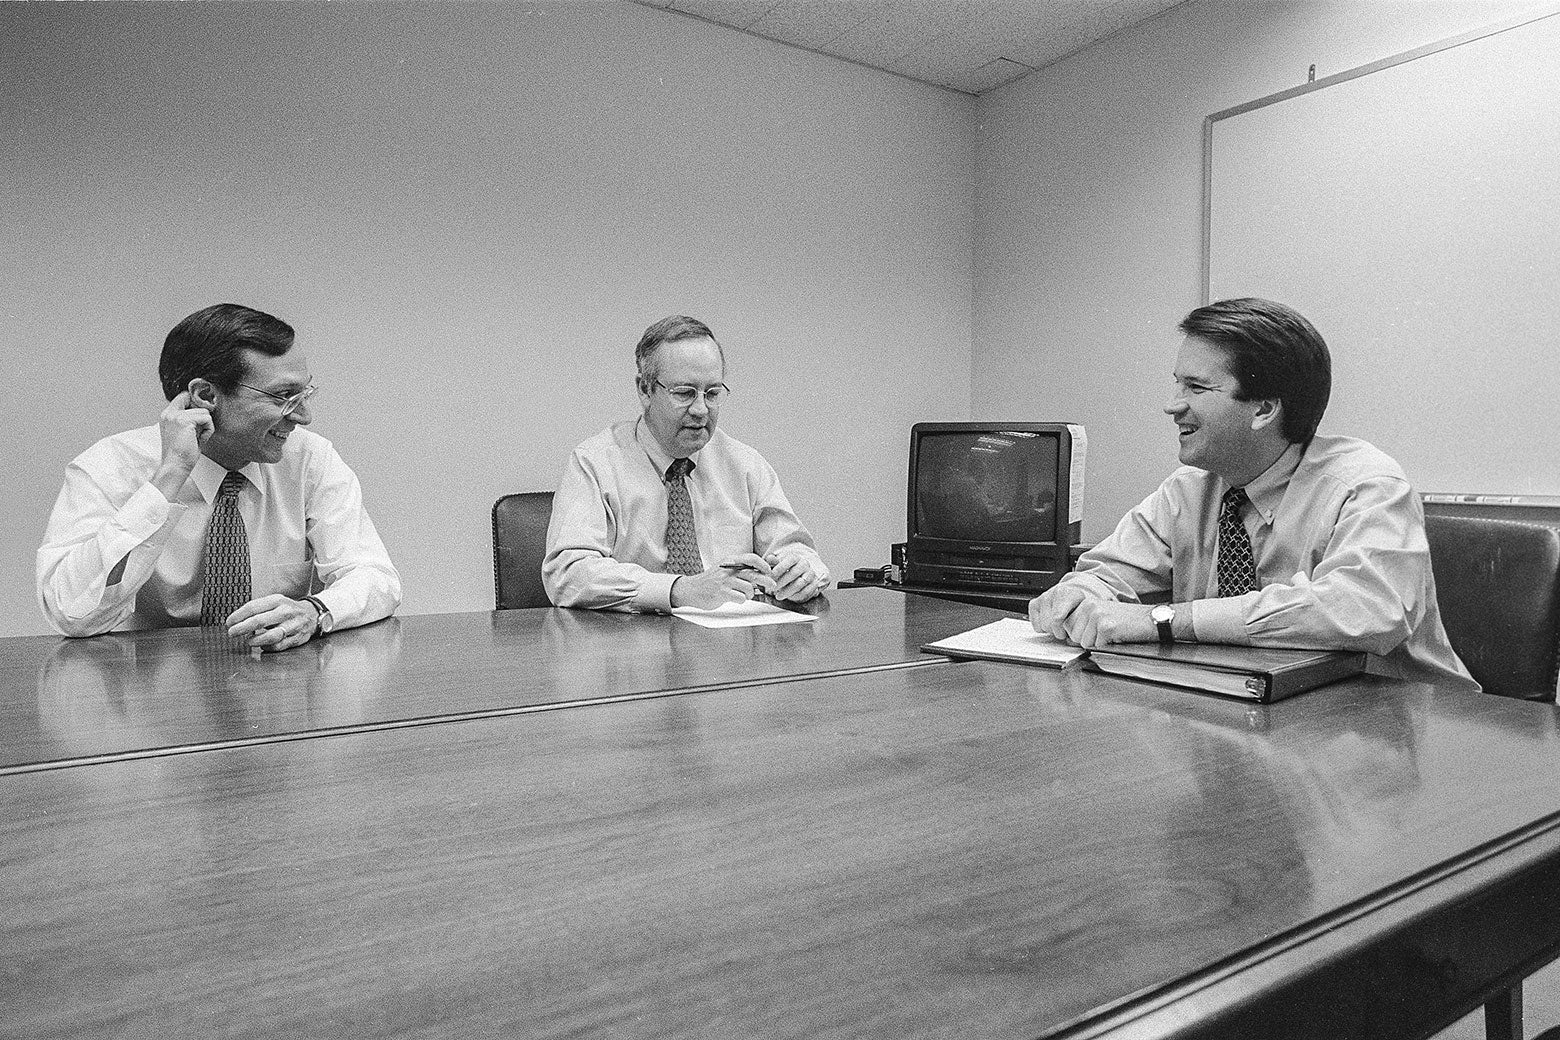 Black and white photo of Starr, Bates, and Kavanaugh sitting at a conference table in a drab room. Bates and Kavanaugh smile broadly.